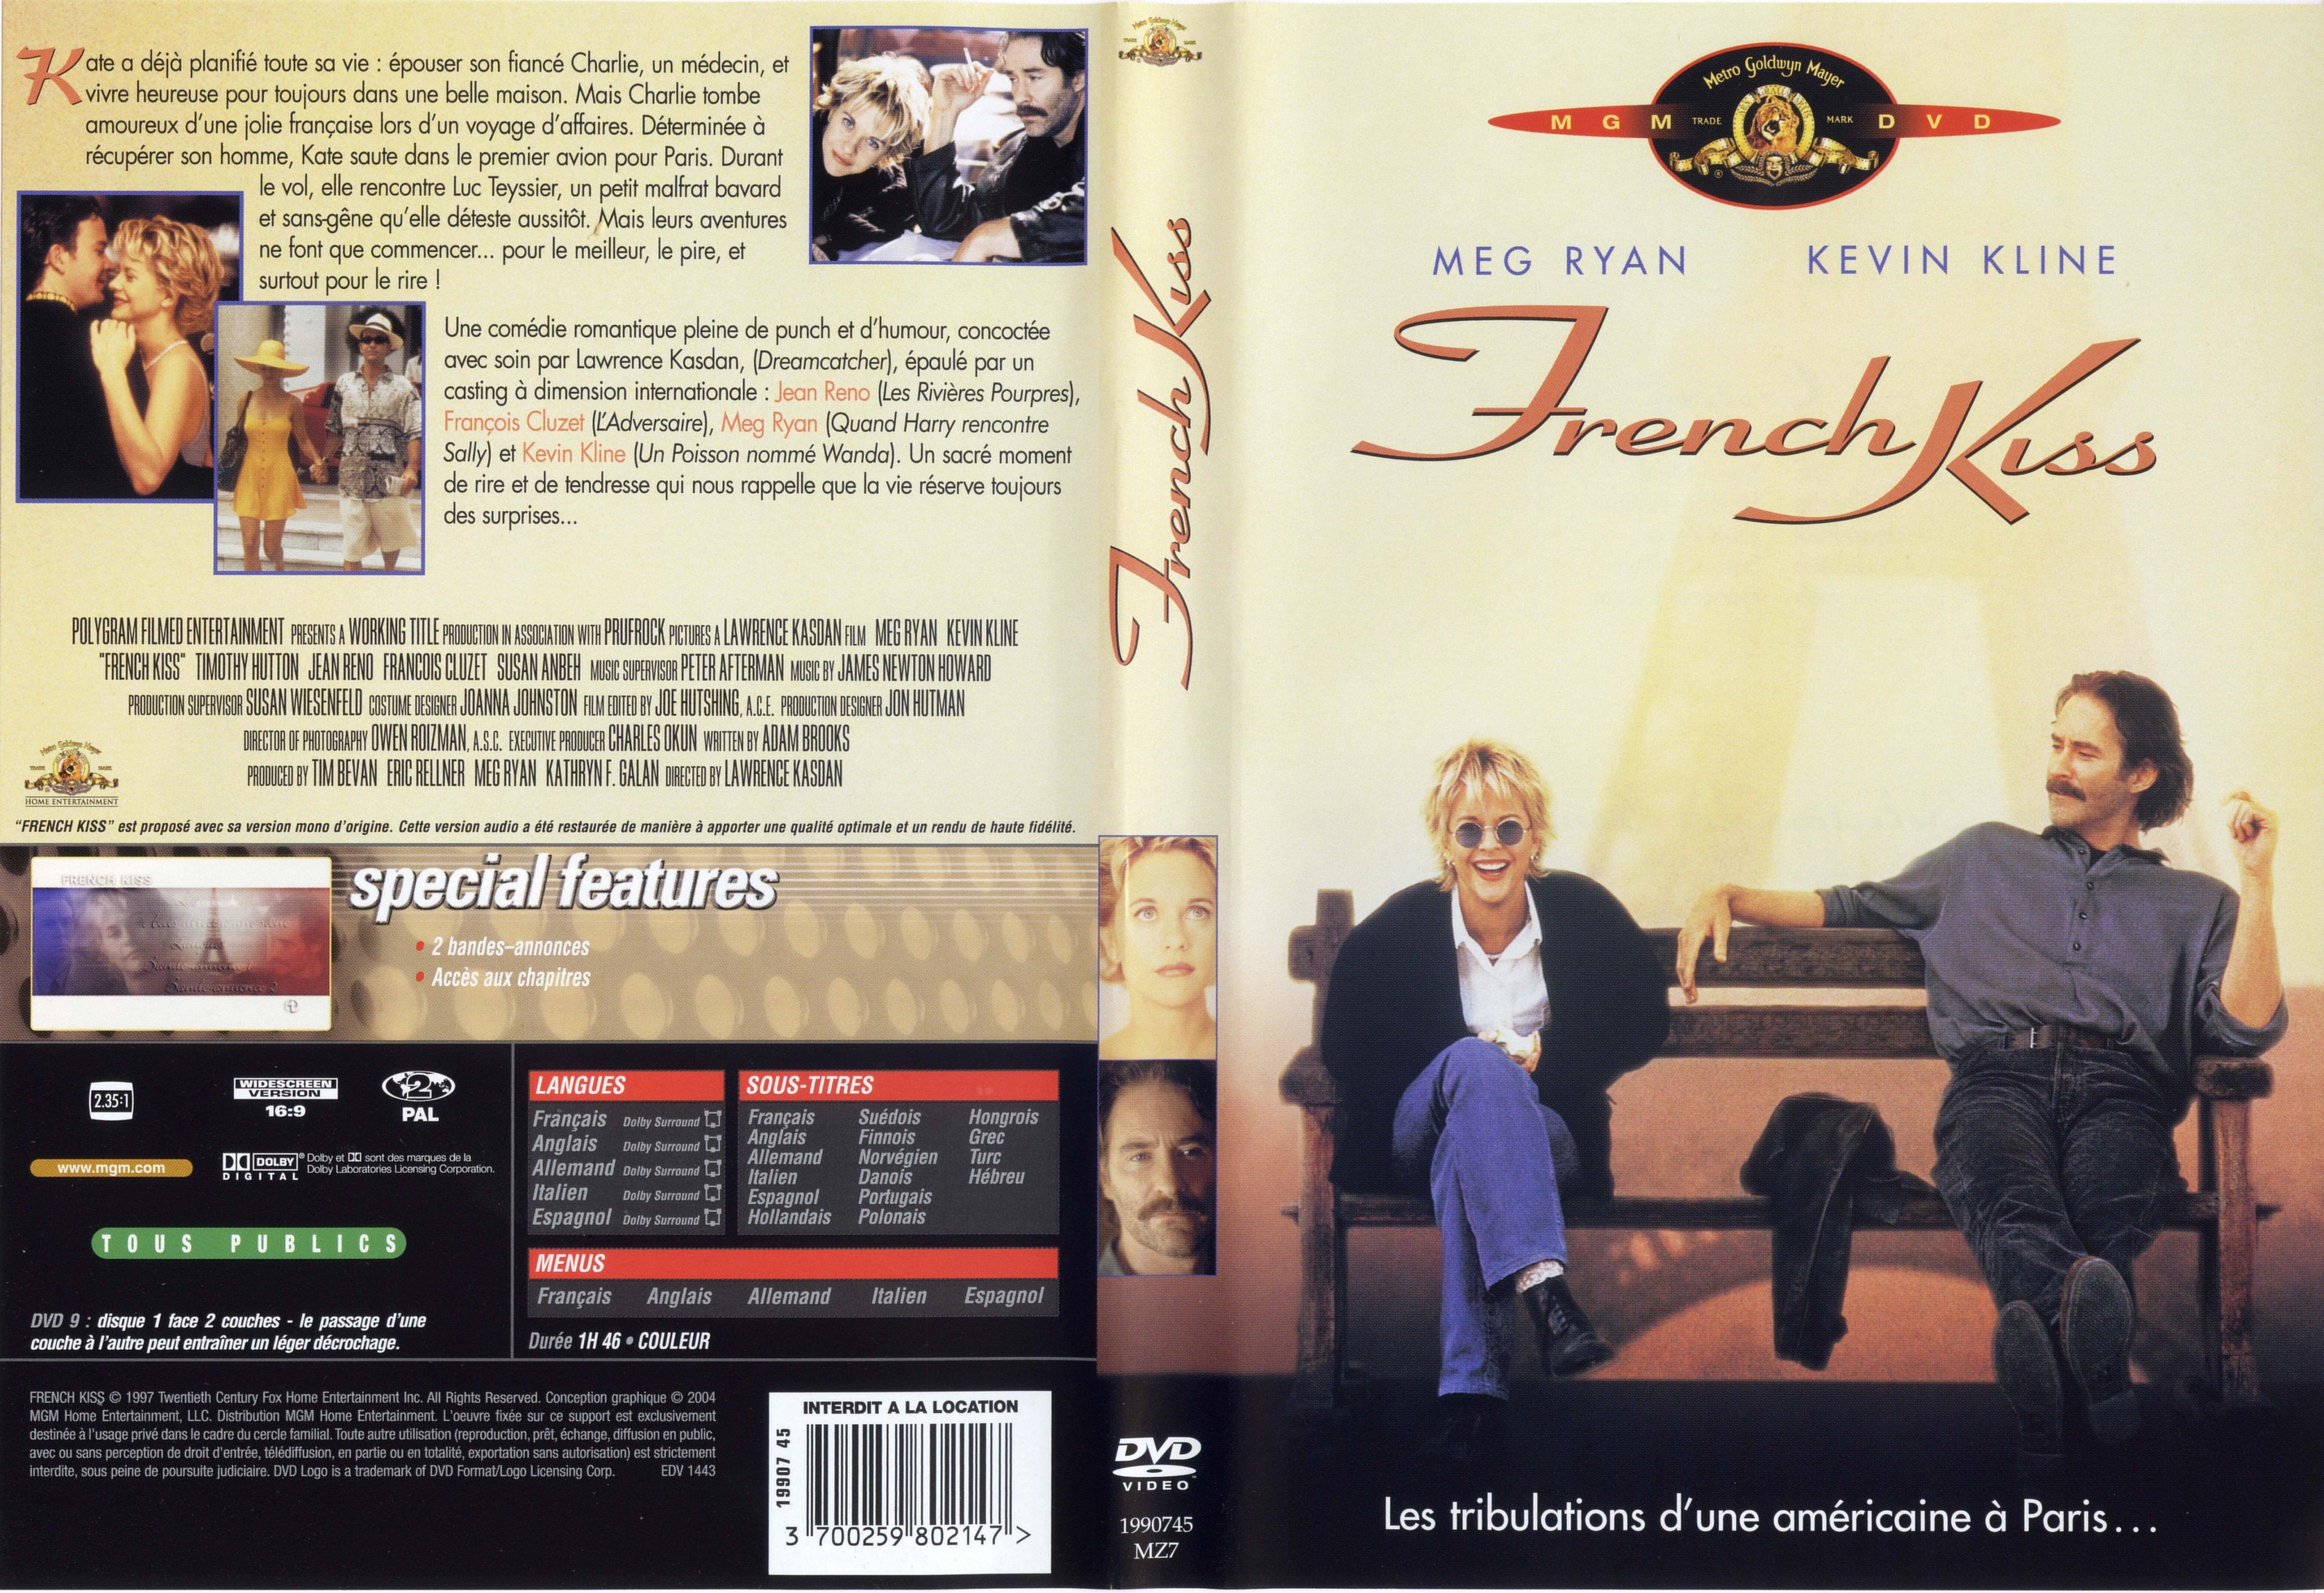 Jaquette DVD French kiss